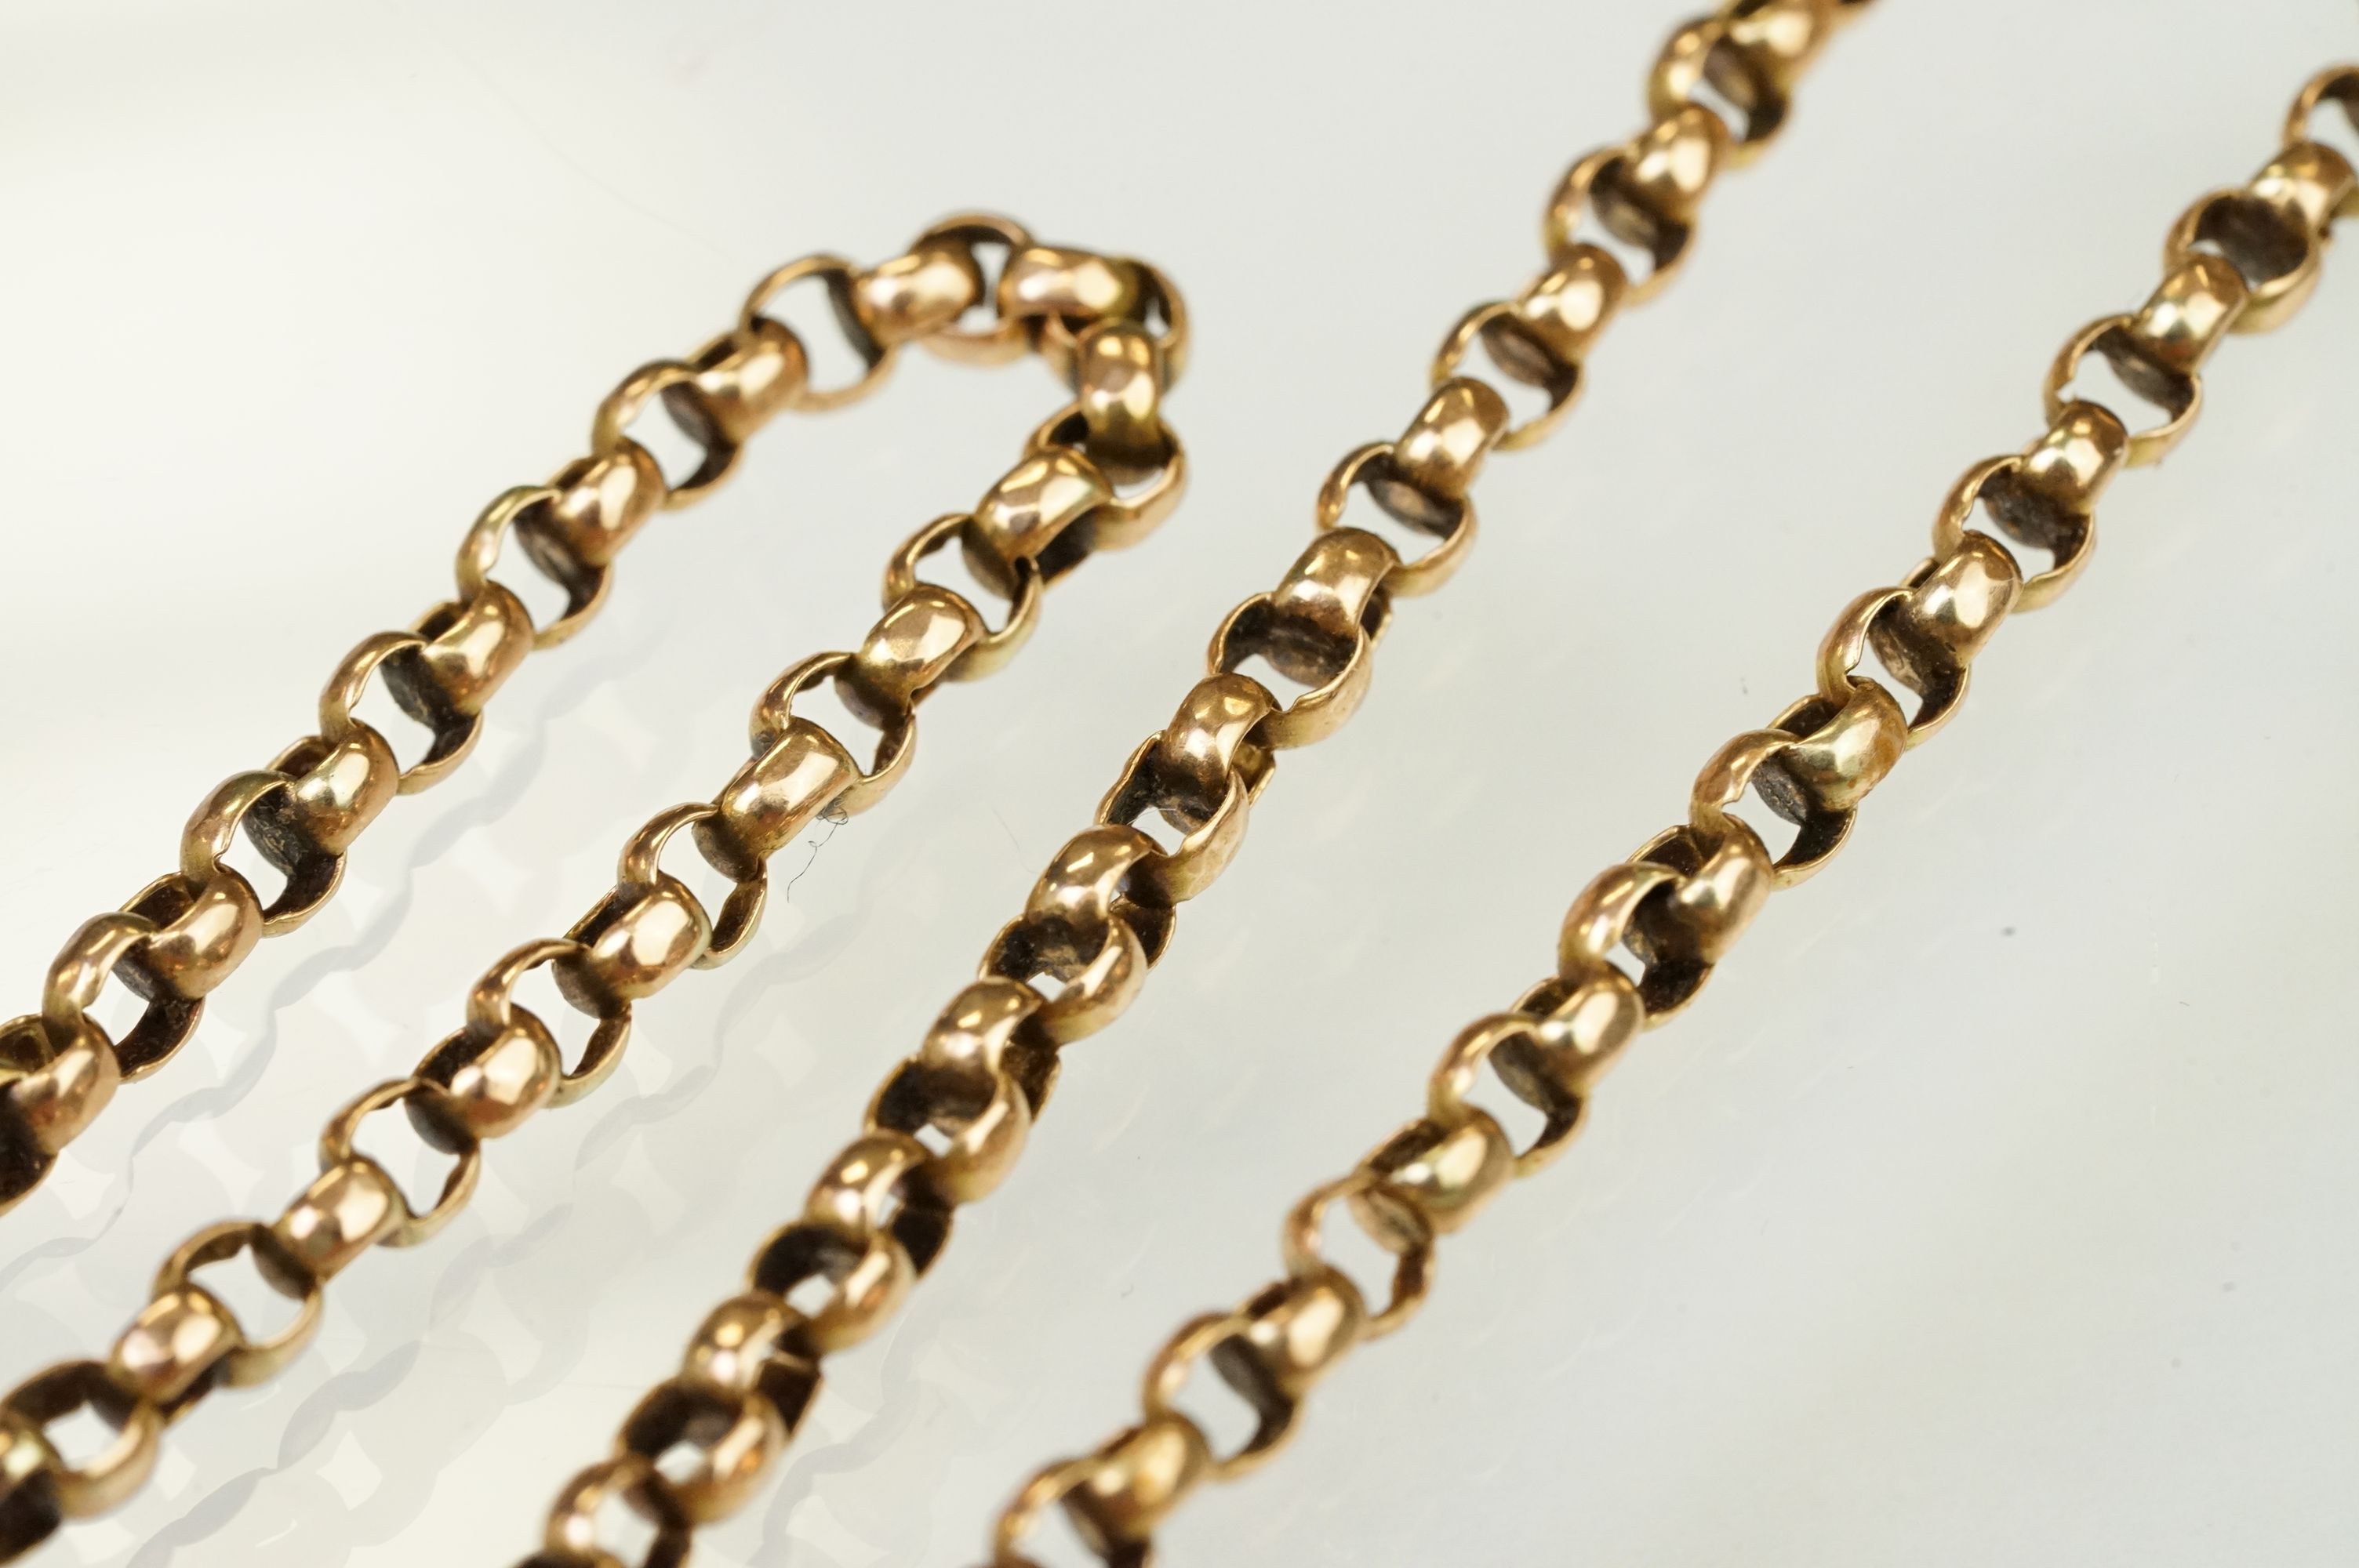 Early 20th Century antique 9ct gold belcher link necklace chain with cylinder clasp. Marked 9ct to - Image 2 of 5